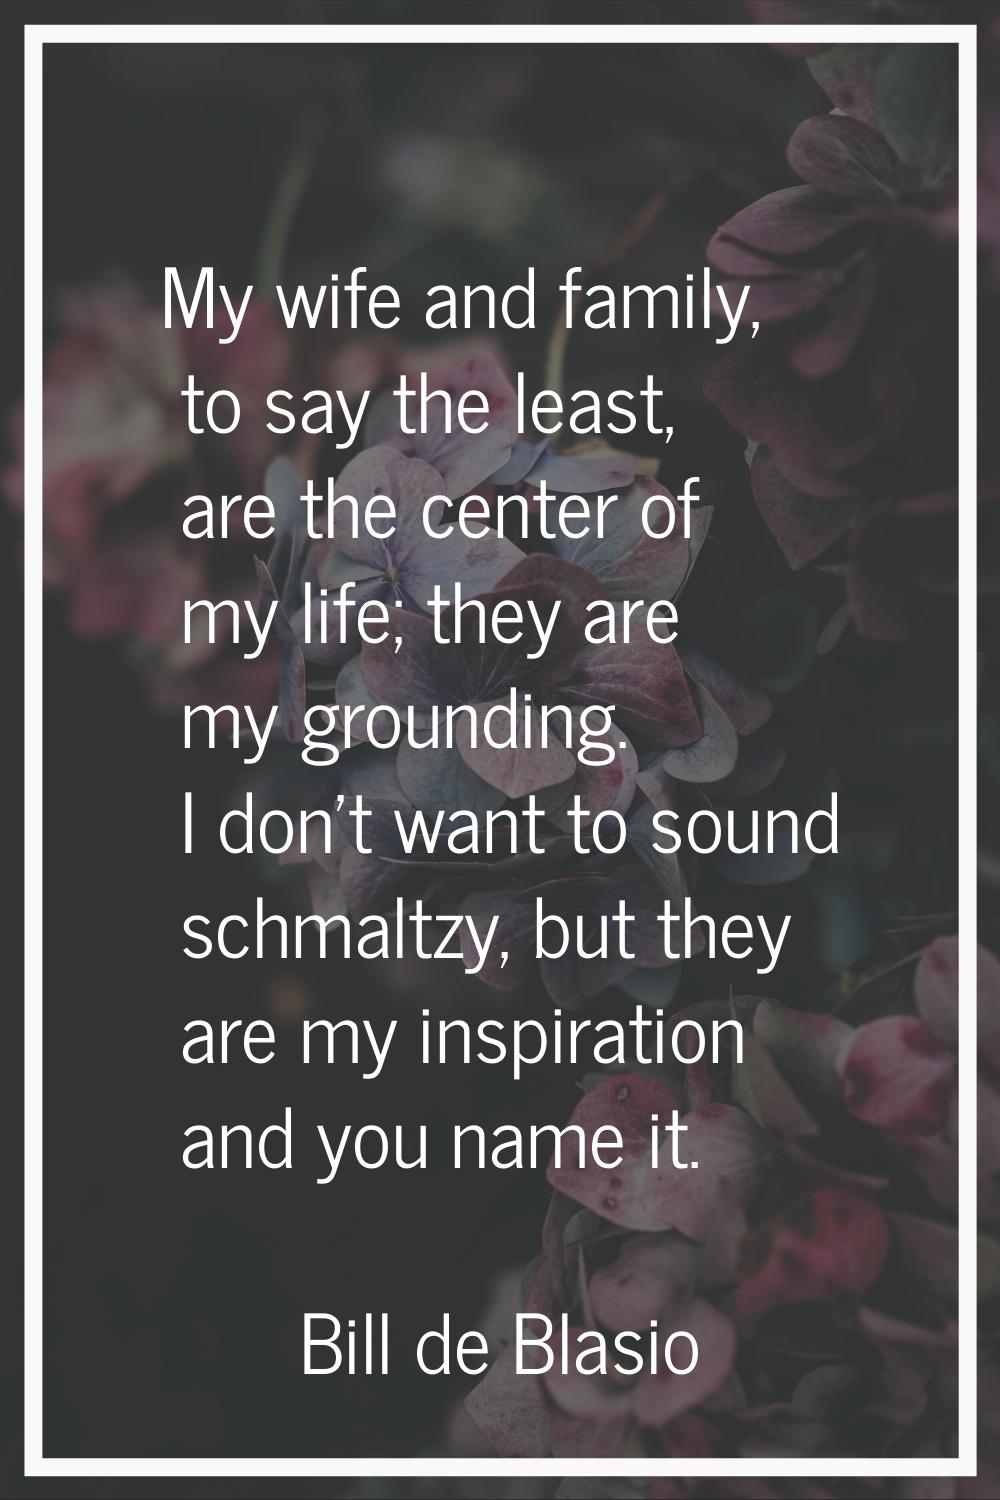 My wife and family, to say the least, are the center of my life; they are my grounding. I don't wan